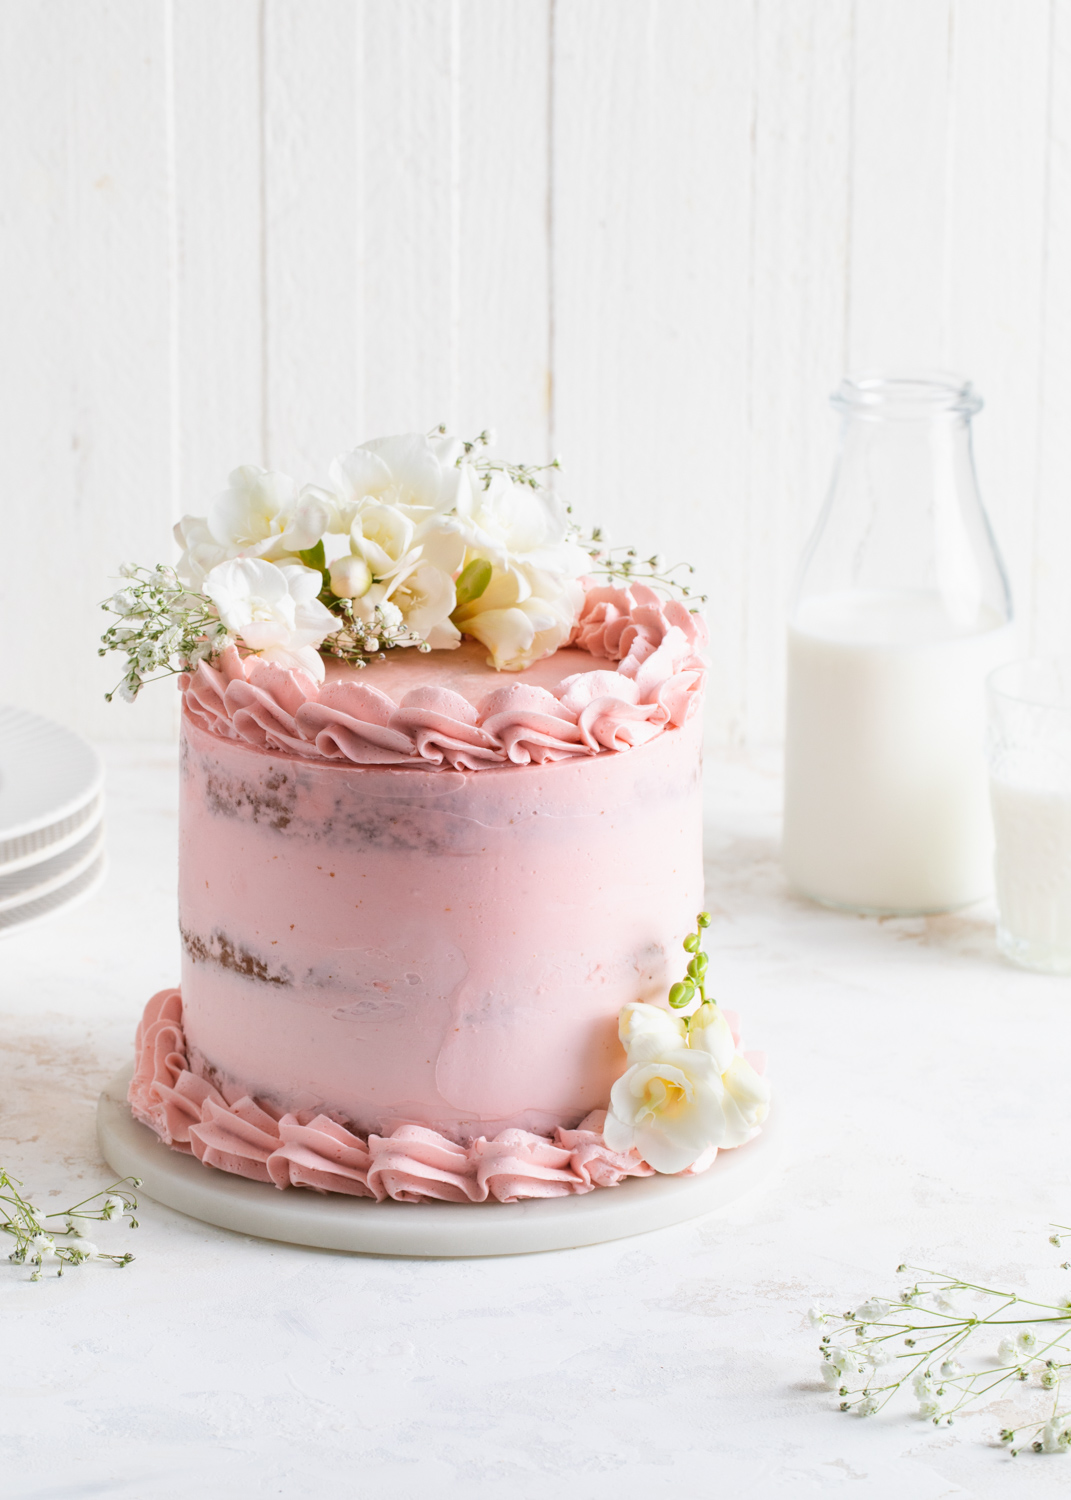 A pink, semi-naked layer cake with white flowers on top